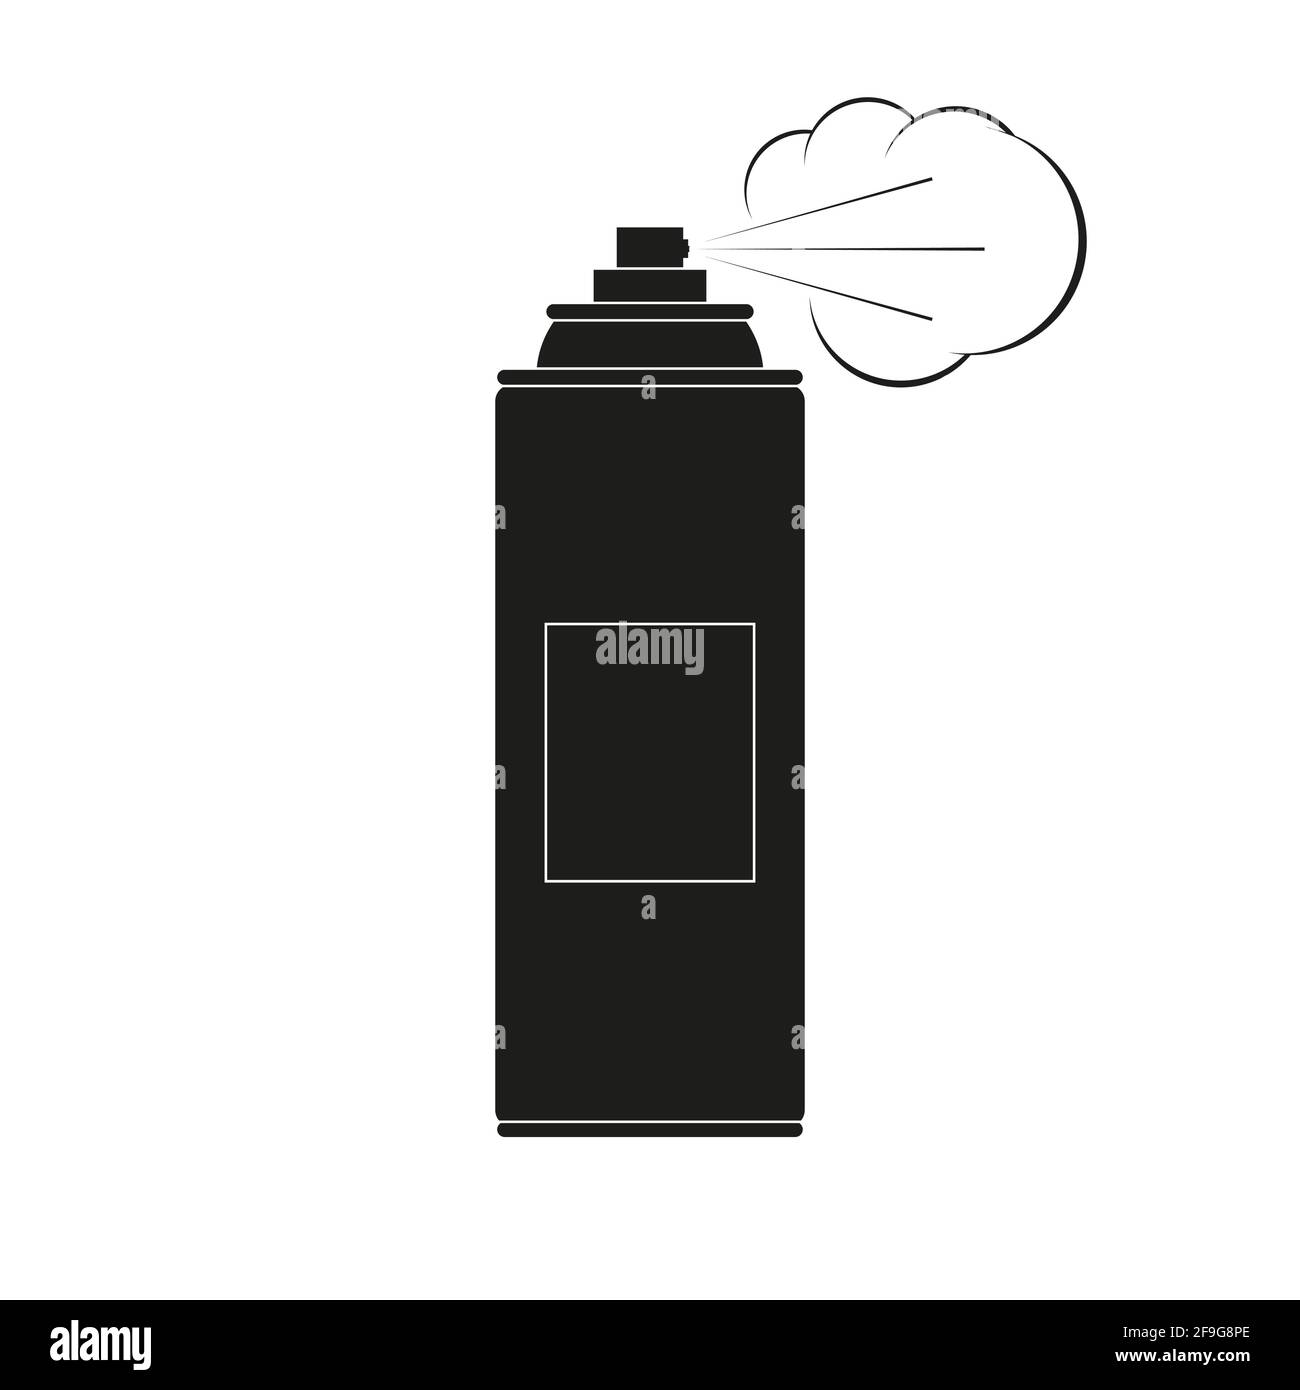 Spray aerosol can icon with mist cloud. Black spray can icon. Flat vector illustration isolated on white. Stock Vector